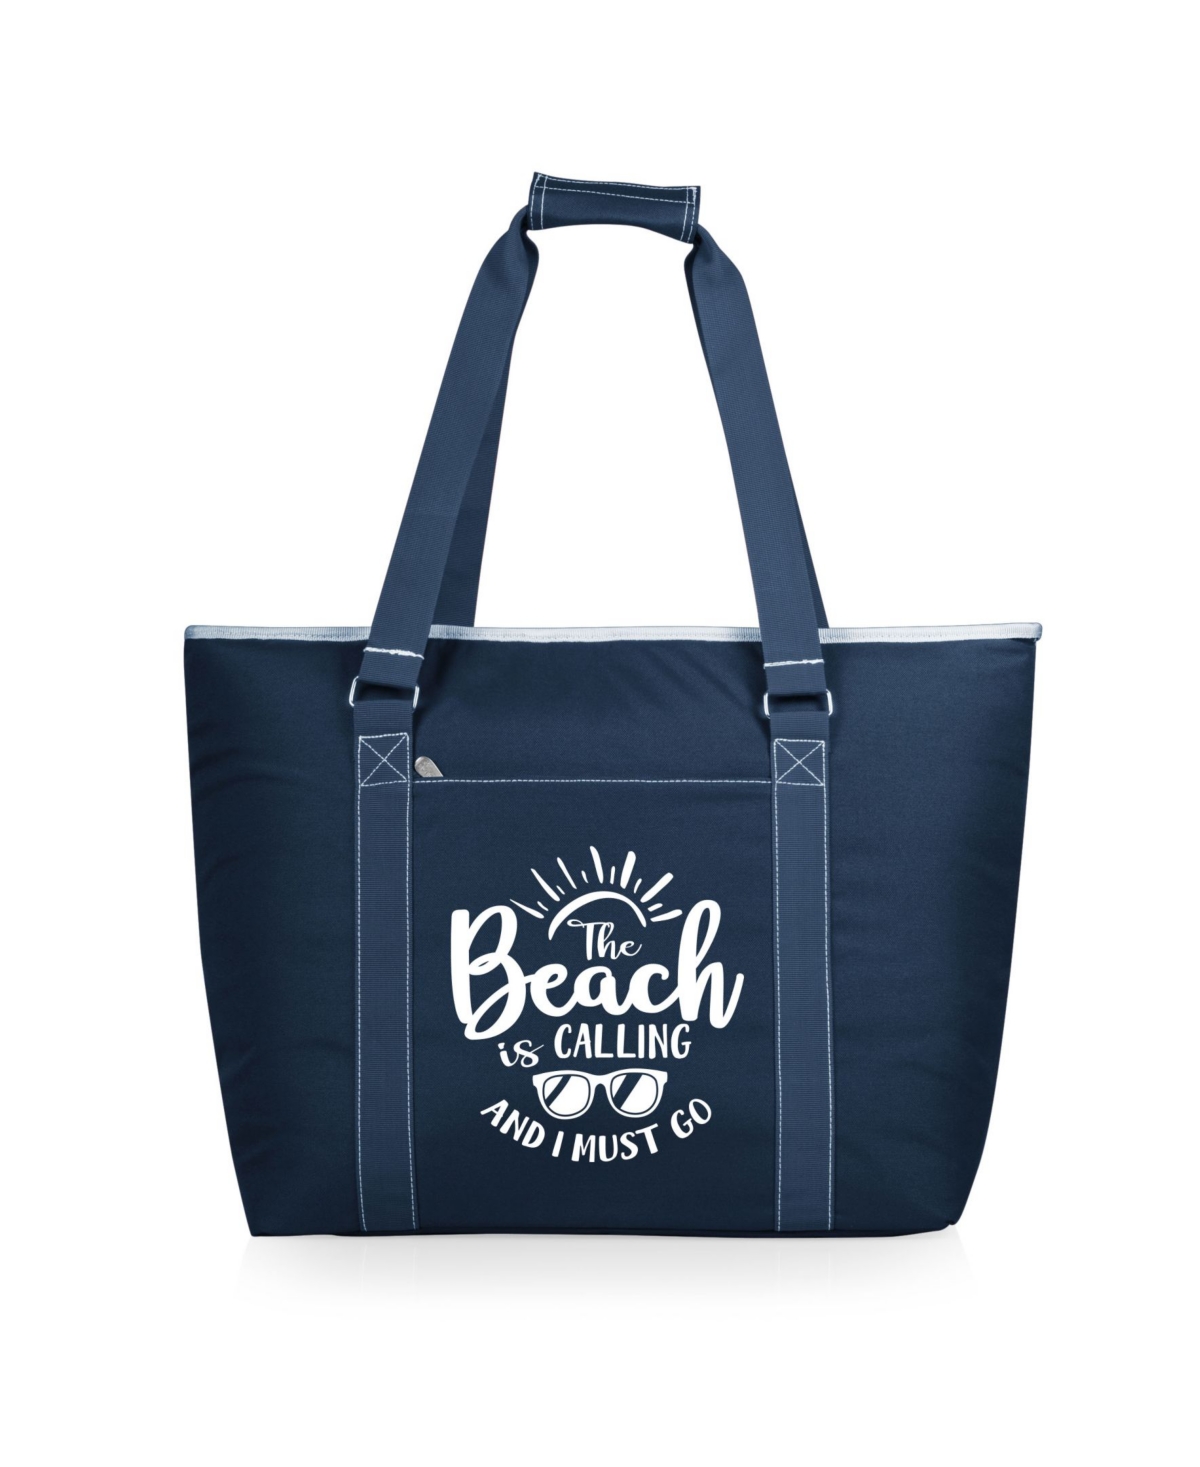 "The Beach Is Calling And I Must Go" Tahoe Xl Cooler Tote Bag - Navy